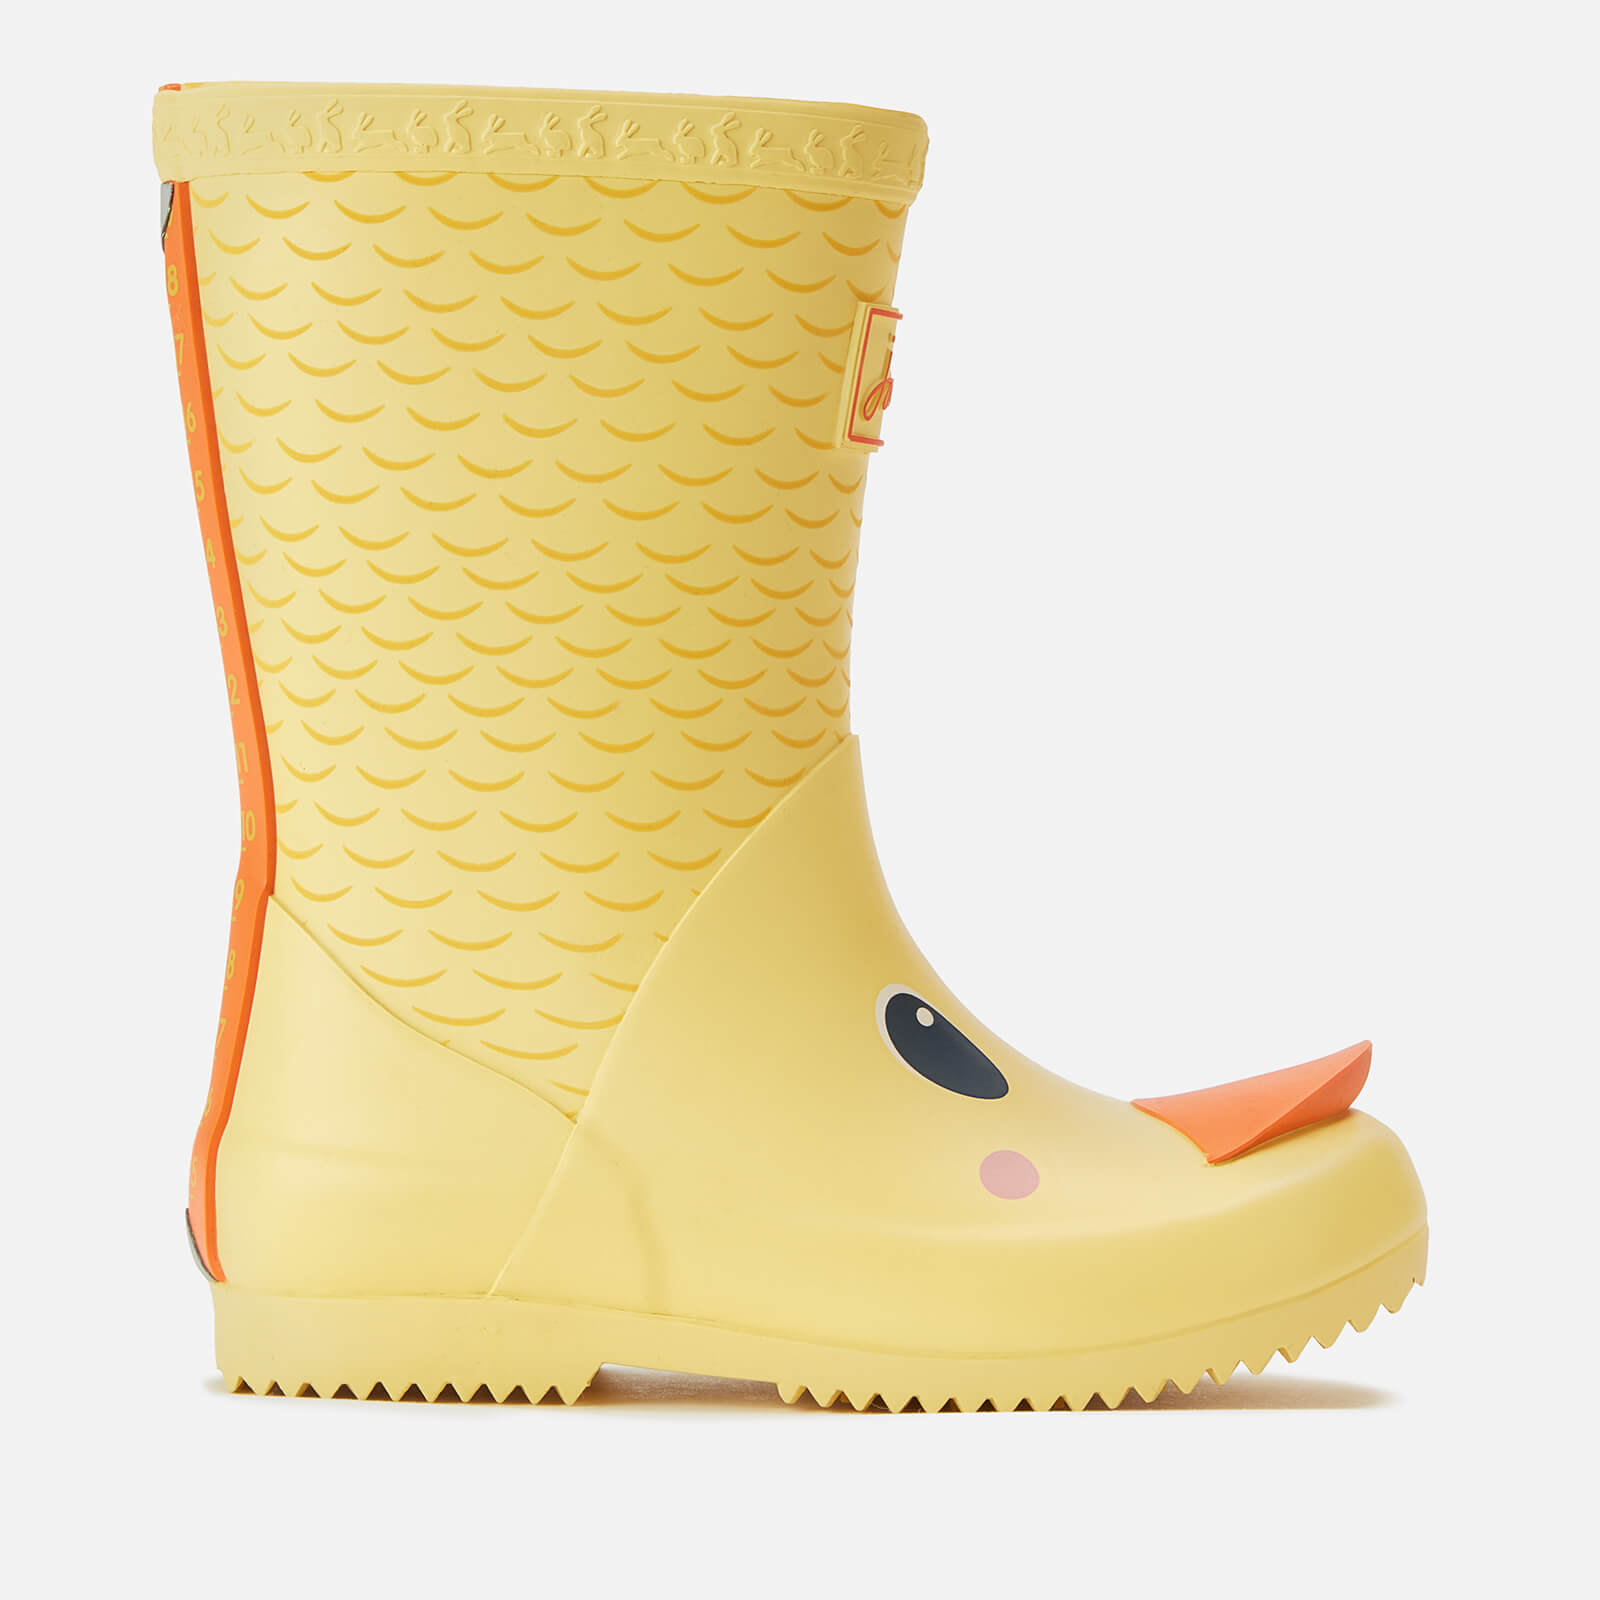 Joules Kids' Printed Wellies - Yellow Duck - UK 8 Toddler